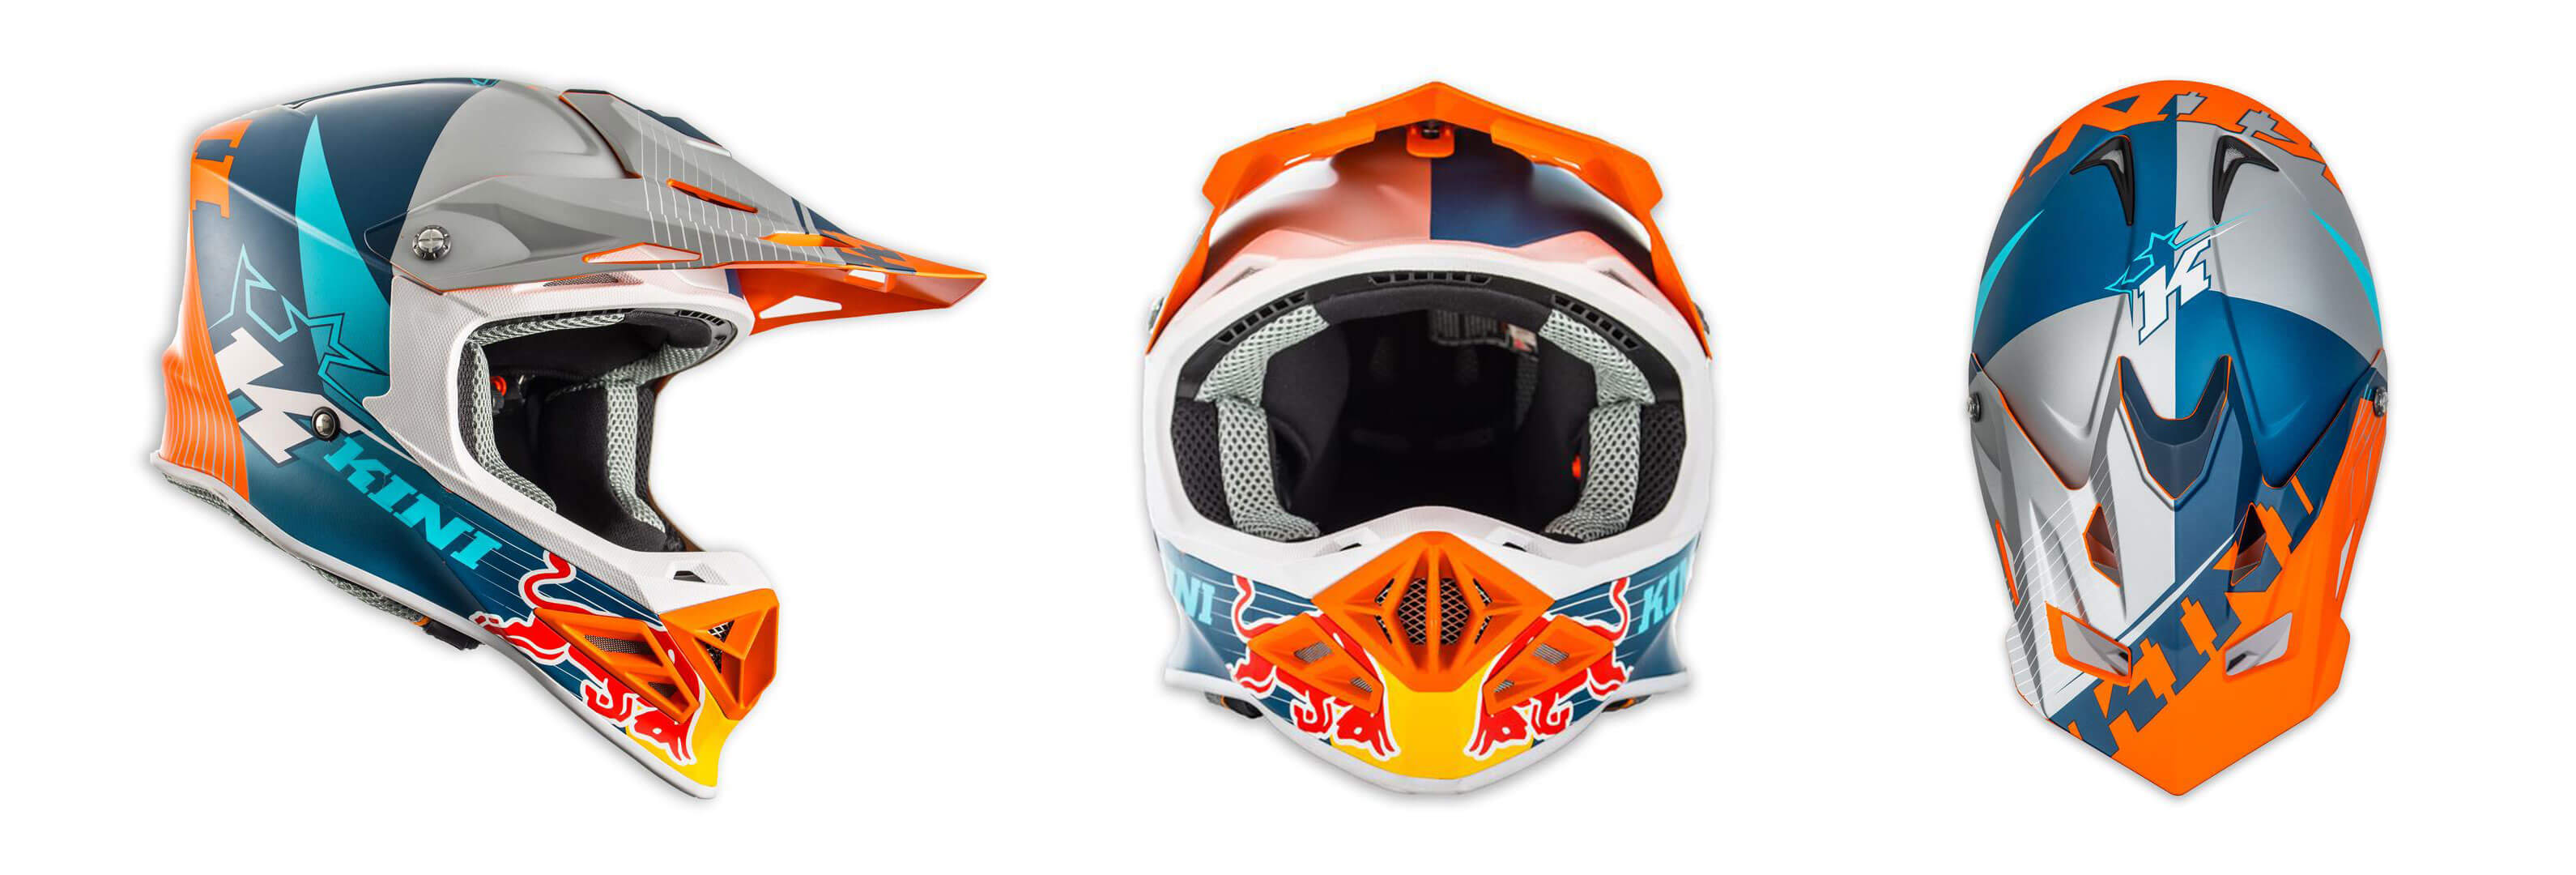 Supermoto Helm - Kini Red Bull Competition Helm